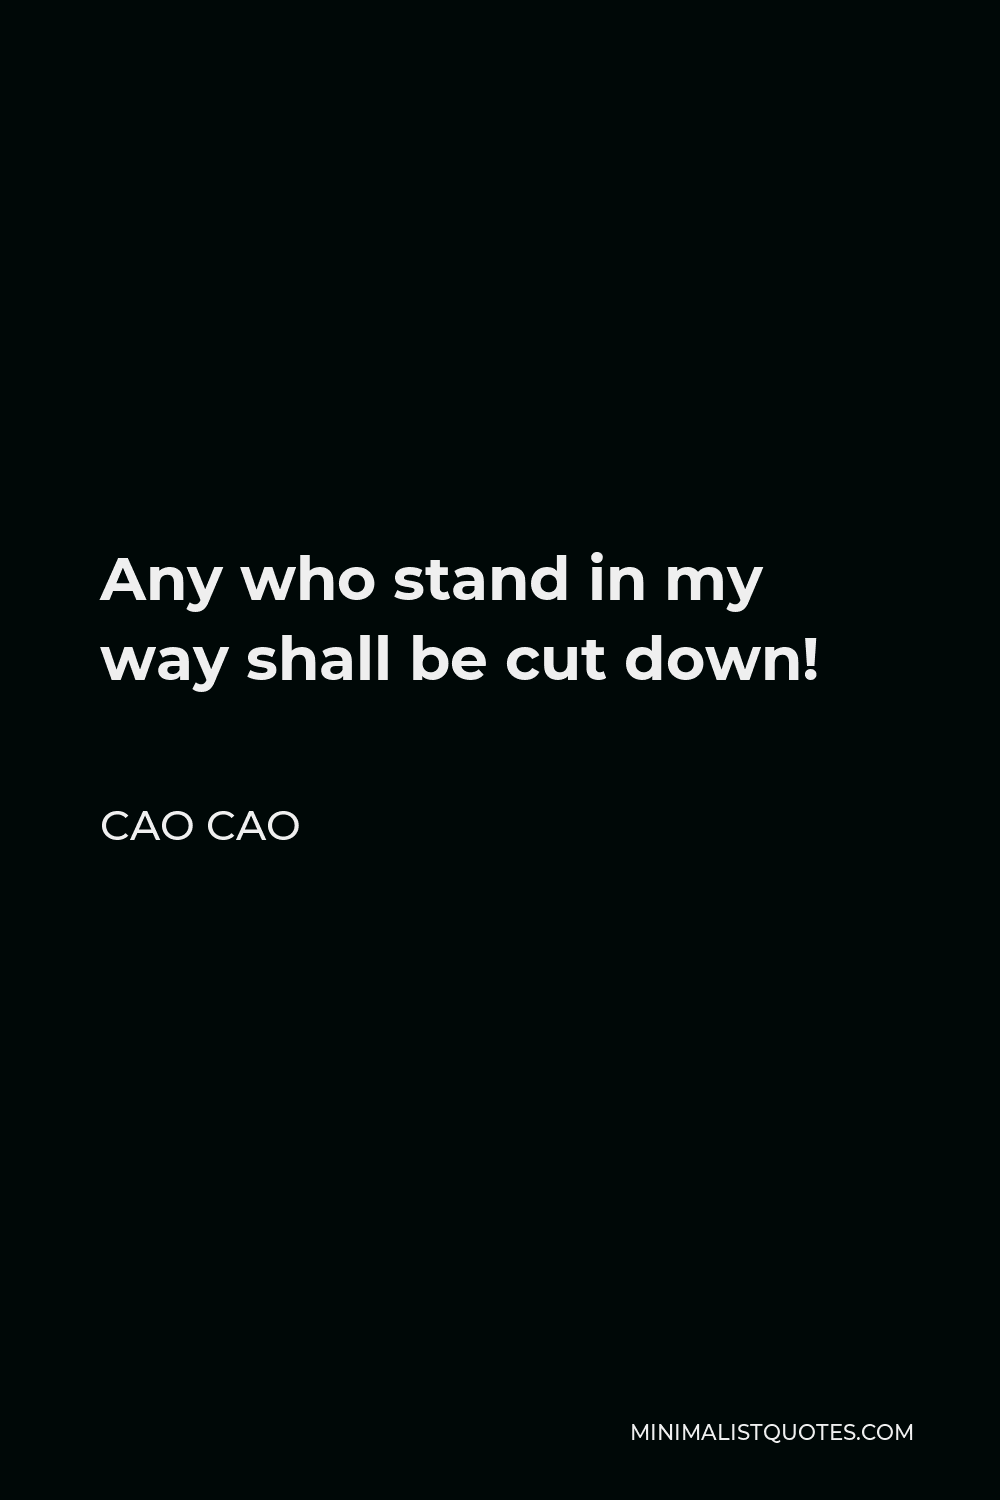 Cao Cao Quote - Any who stand in my way shall be cut down!